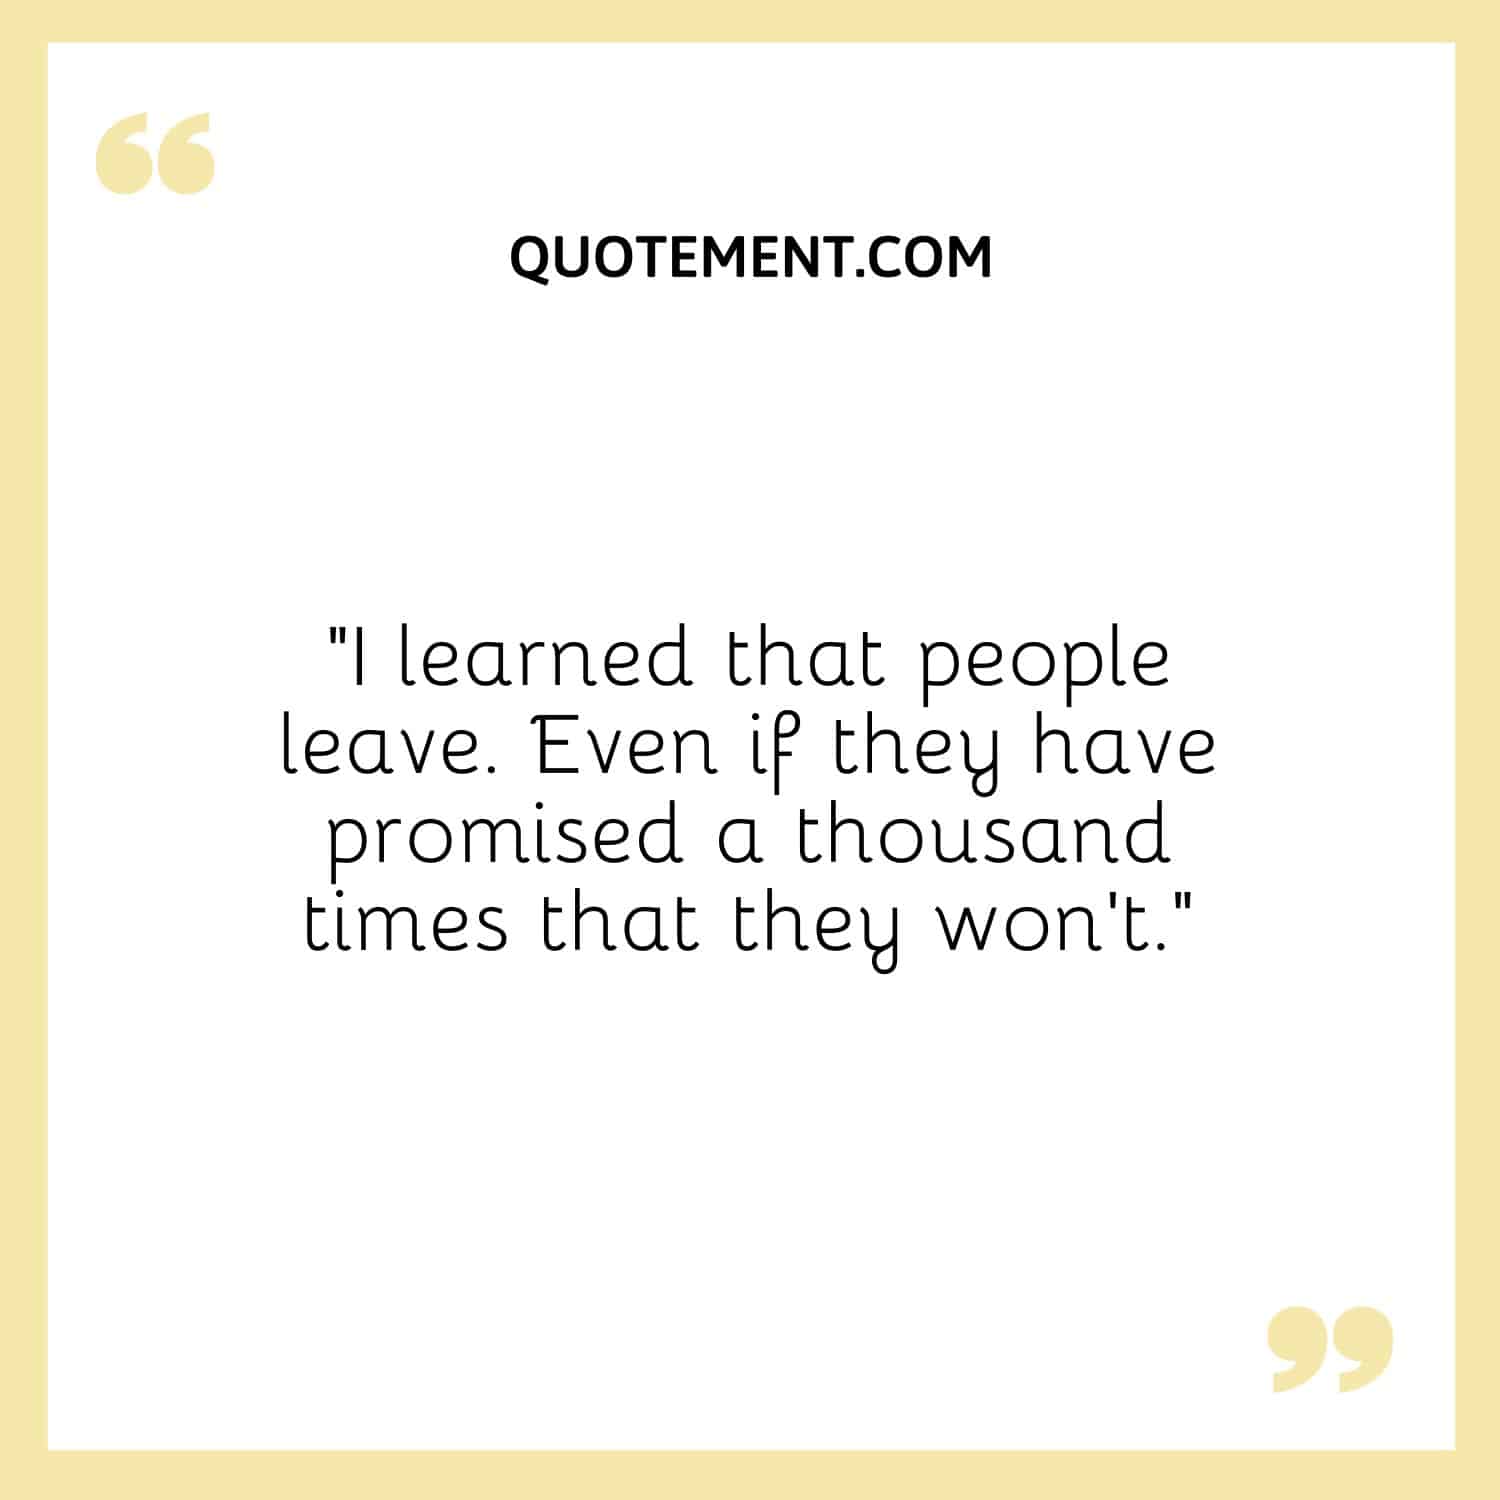 I learned that people leave